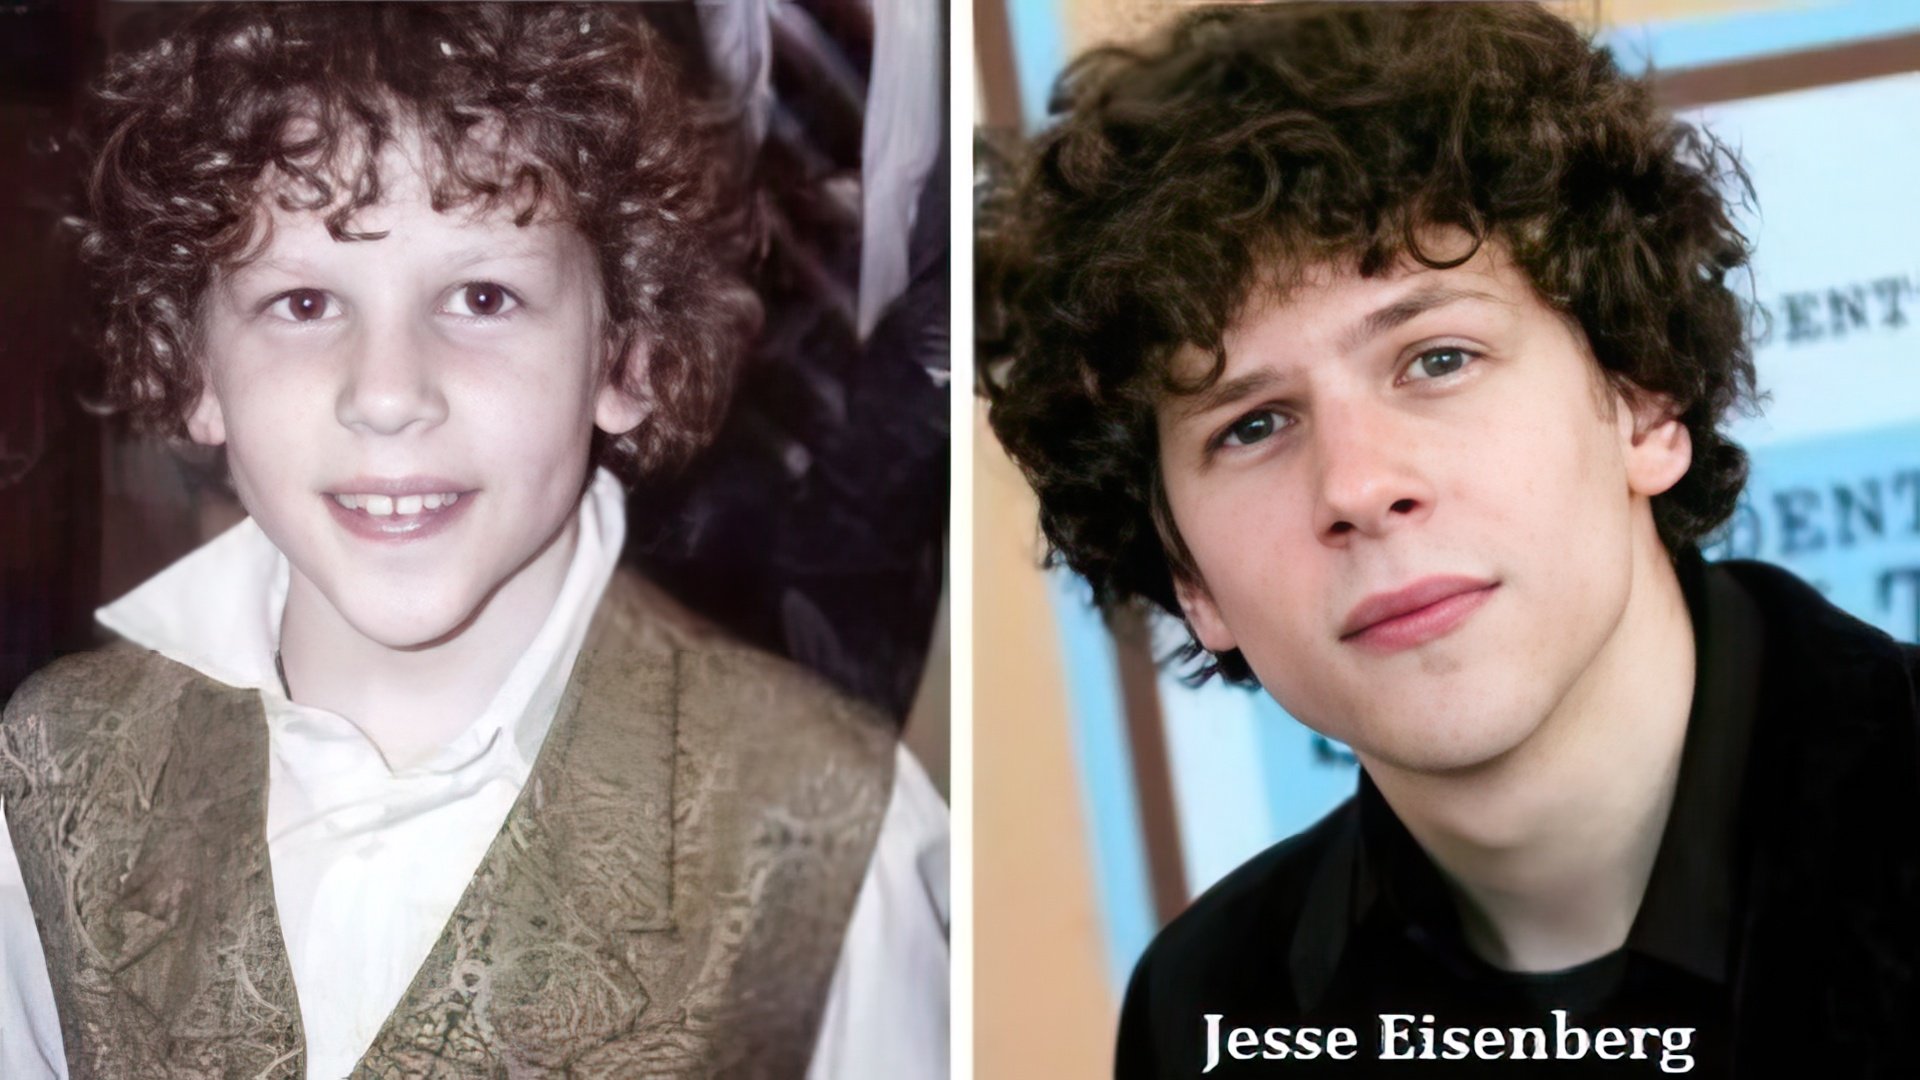 Jesse Eisenberg in childhood and now